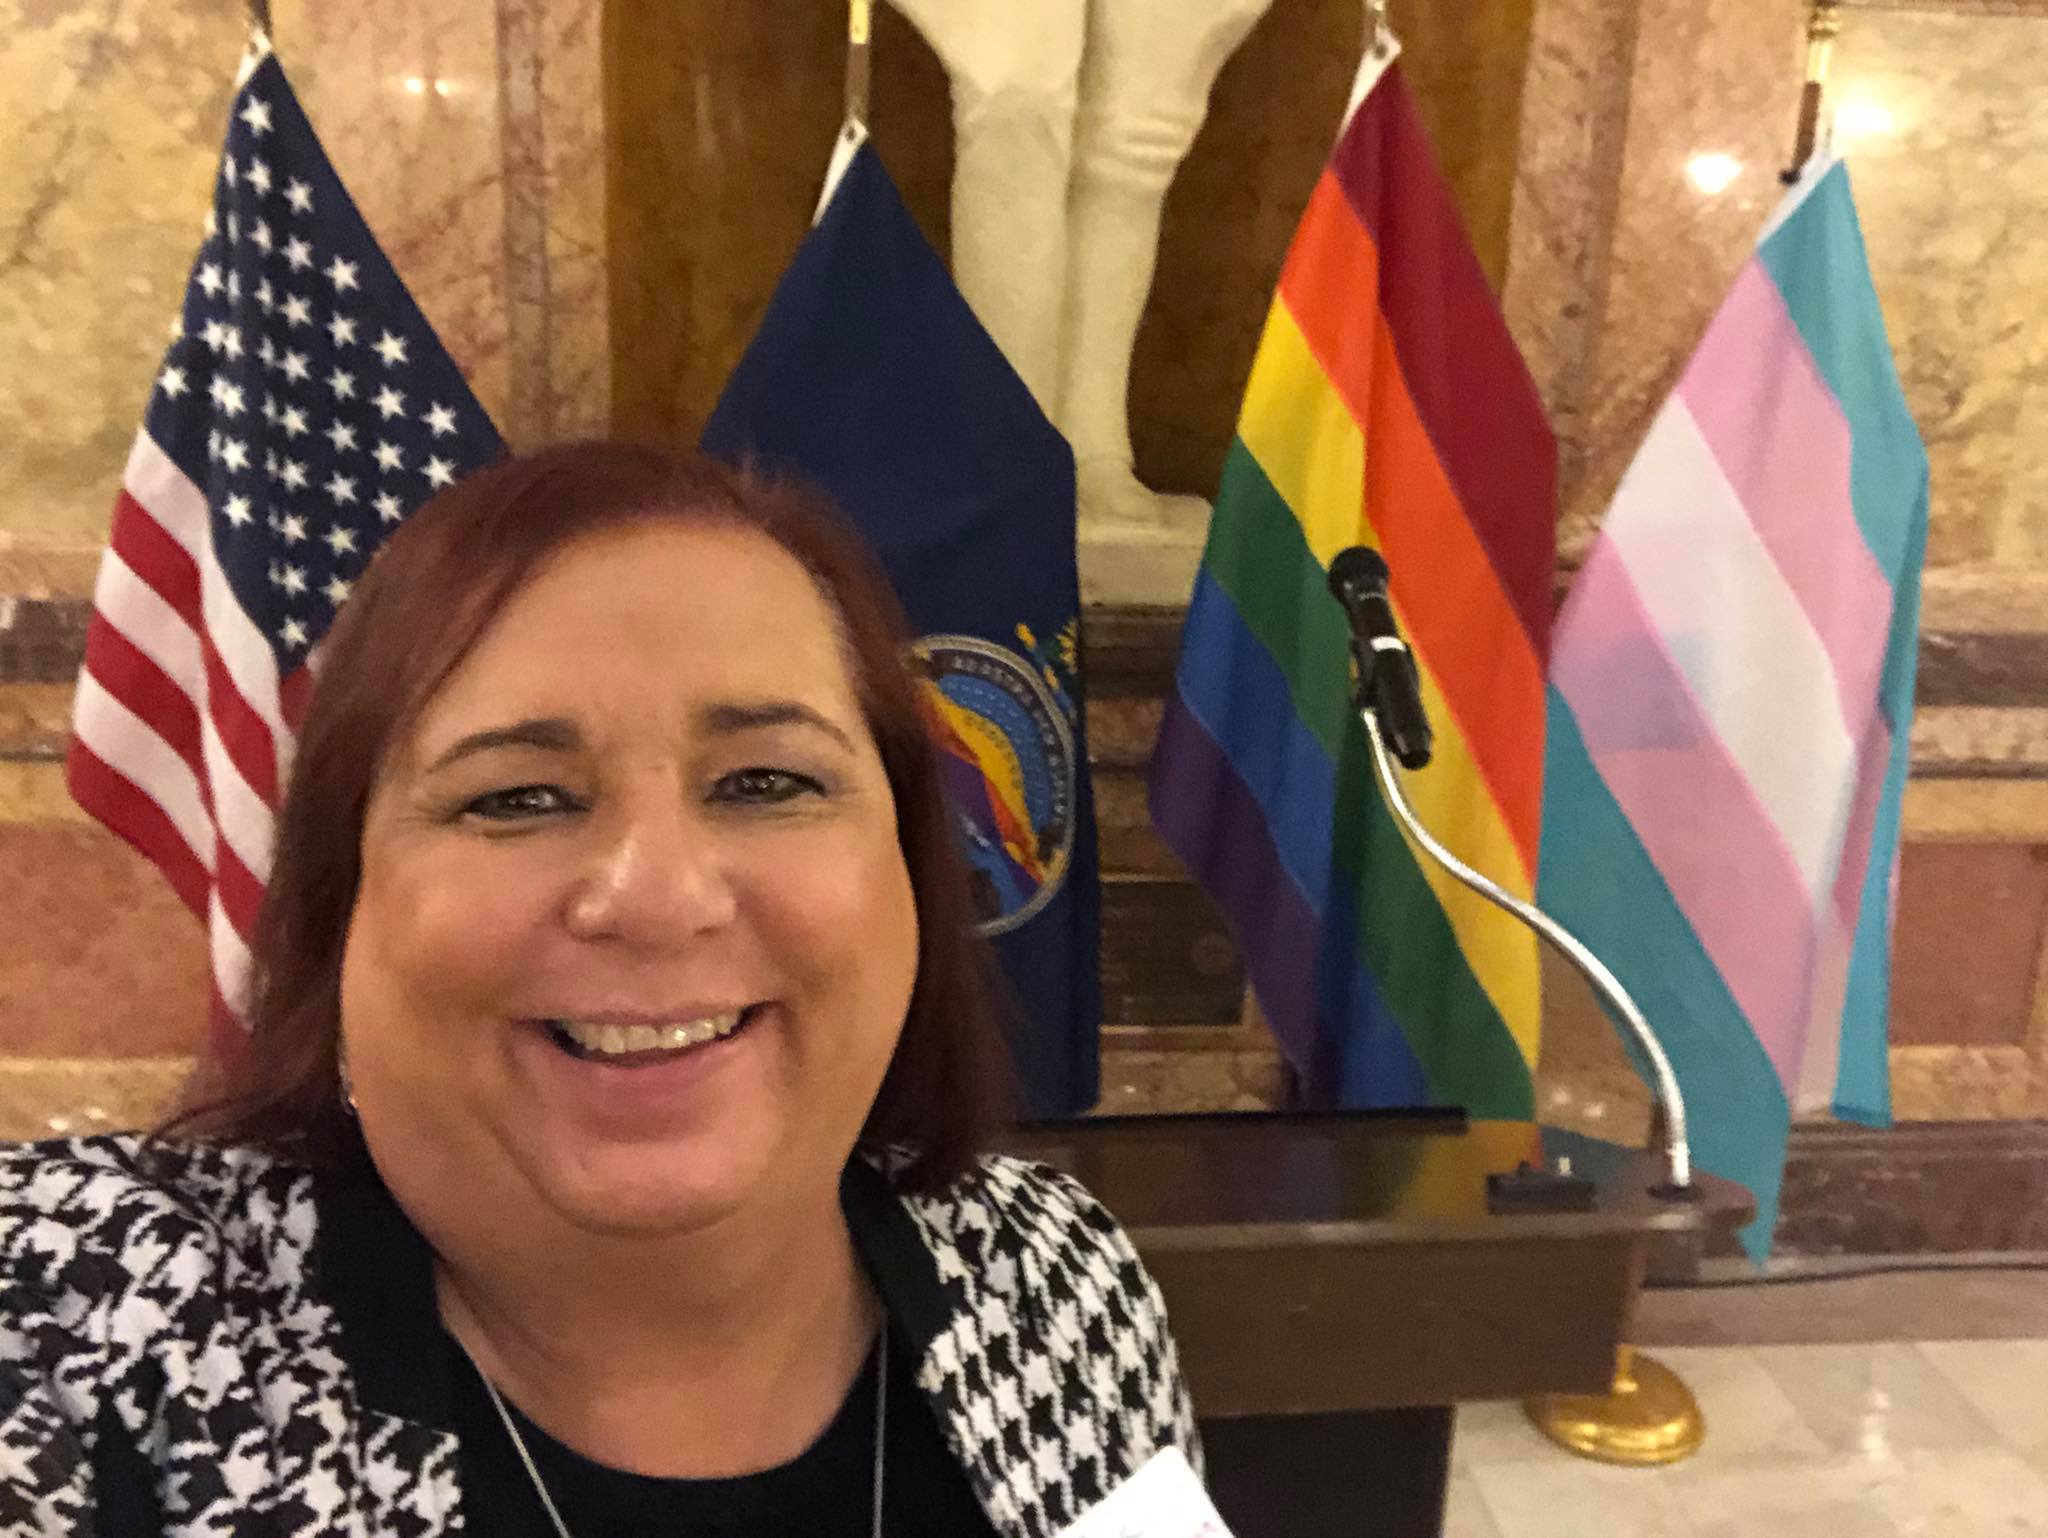 Stephanie Byer is the first Native American trans woman elected to office anywhere in the United States